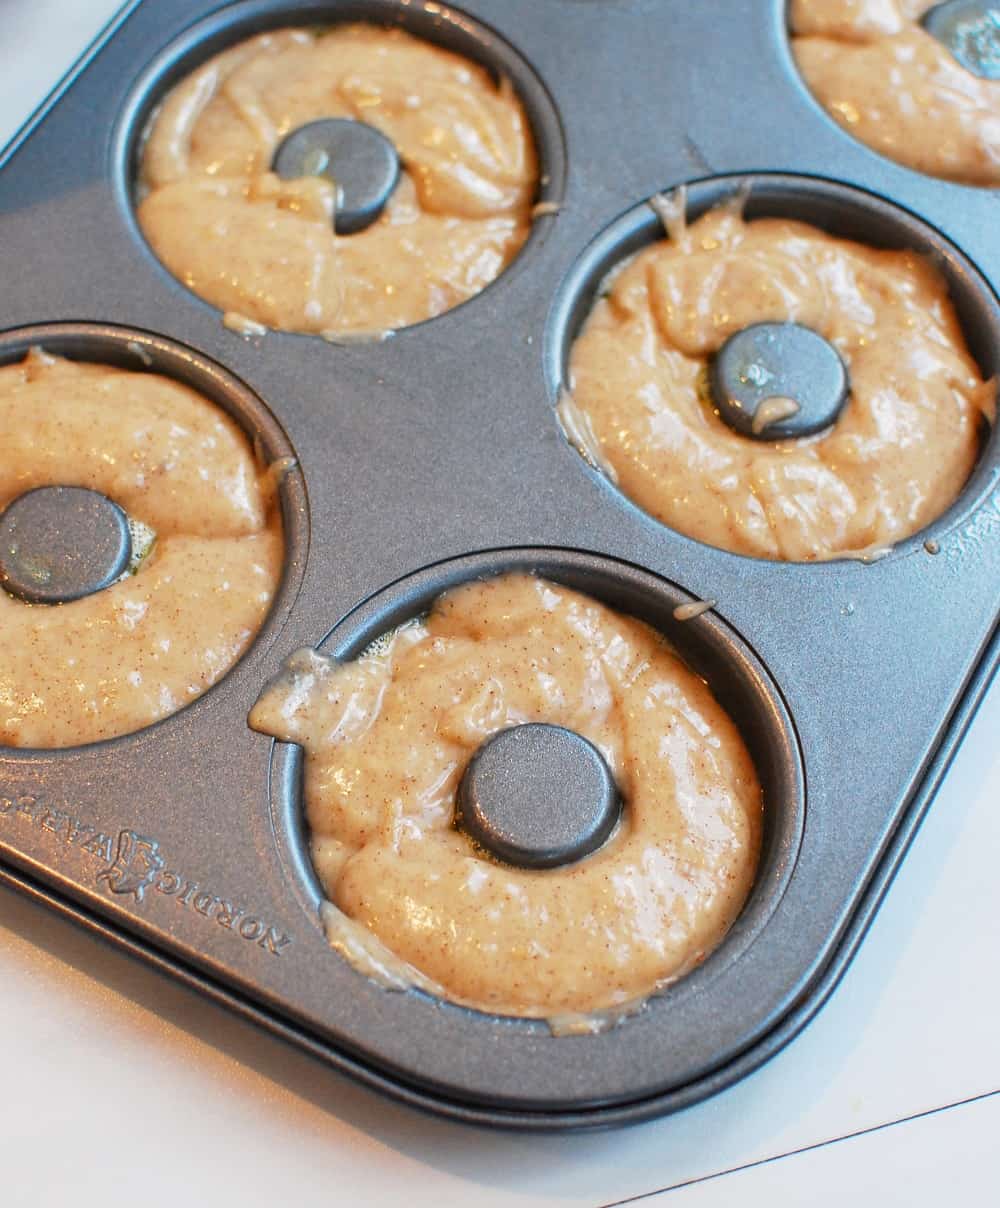 Donut batter in a donut pan